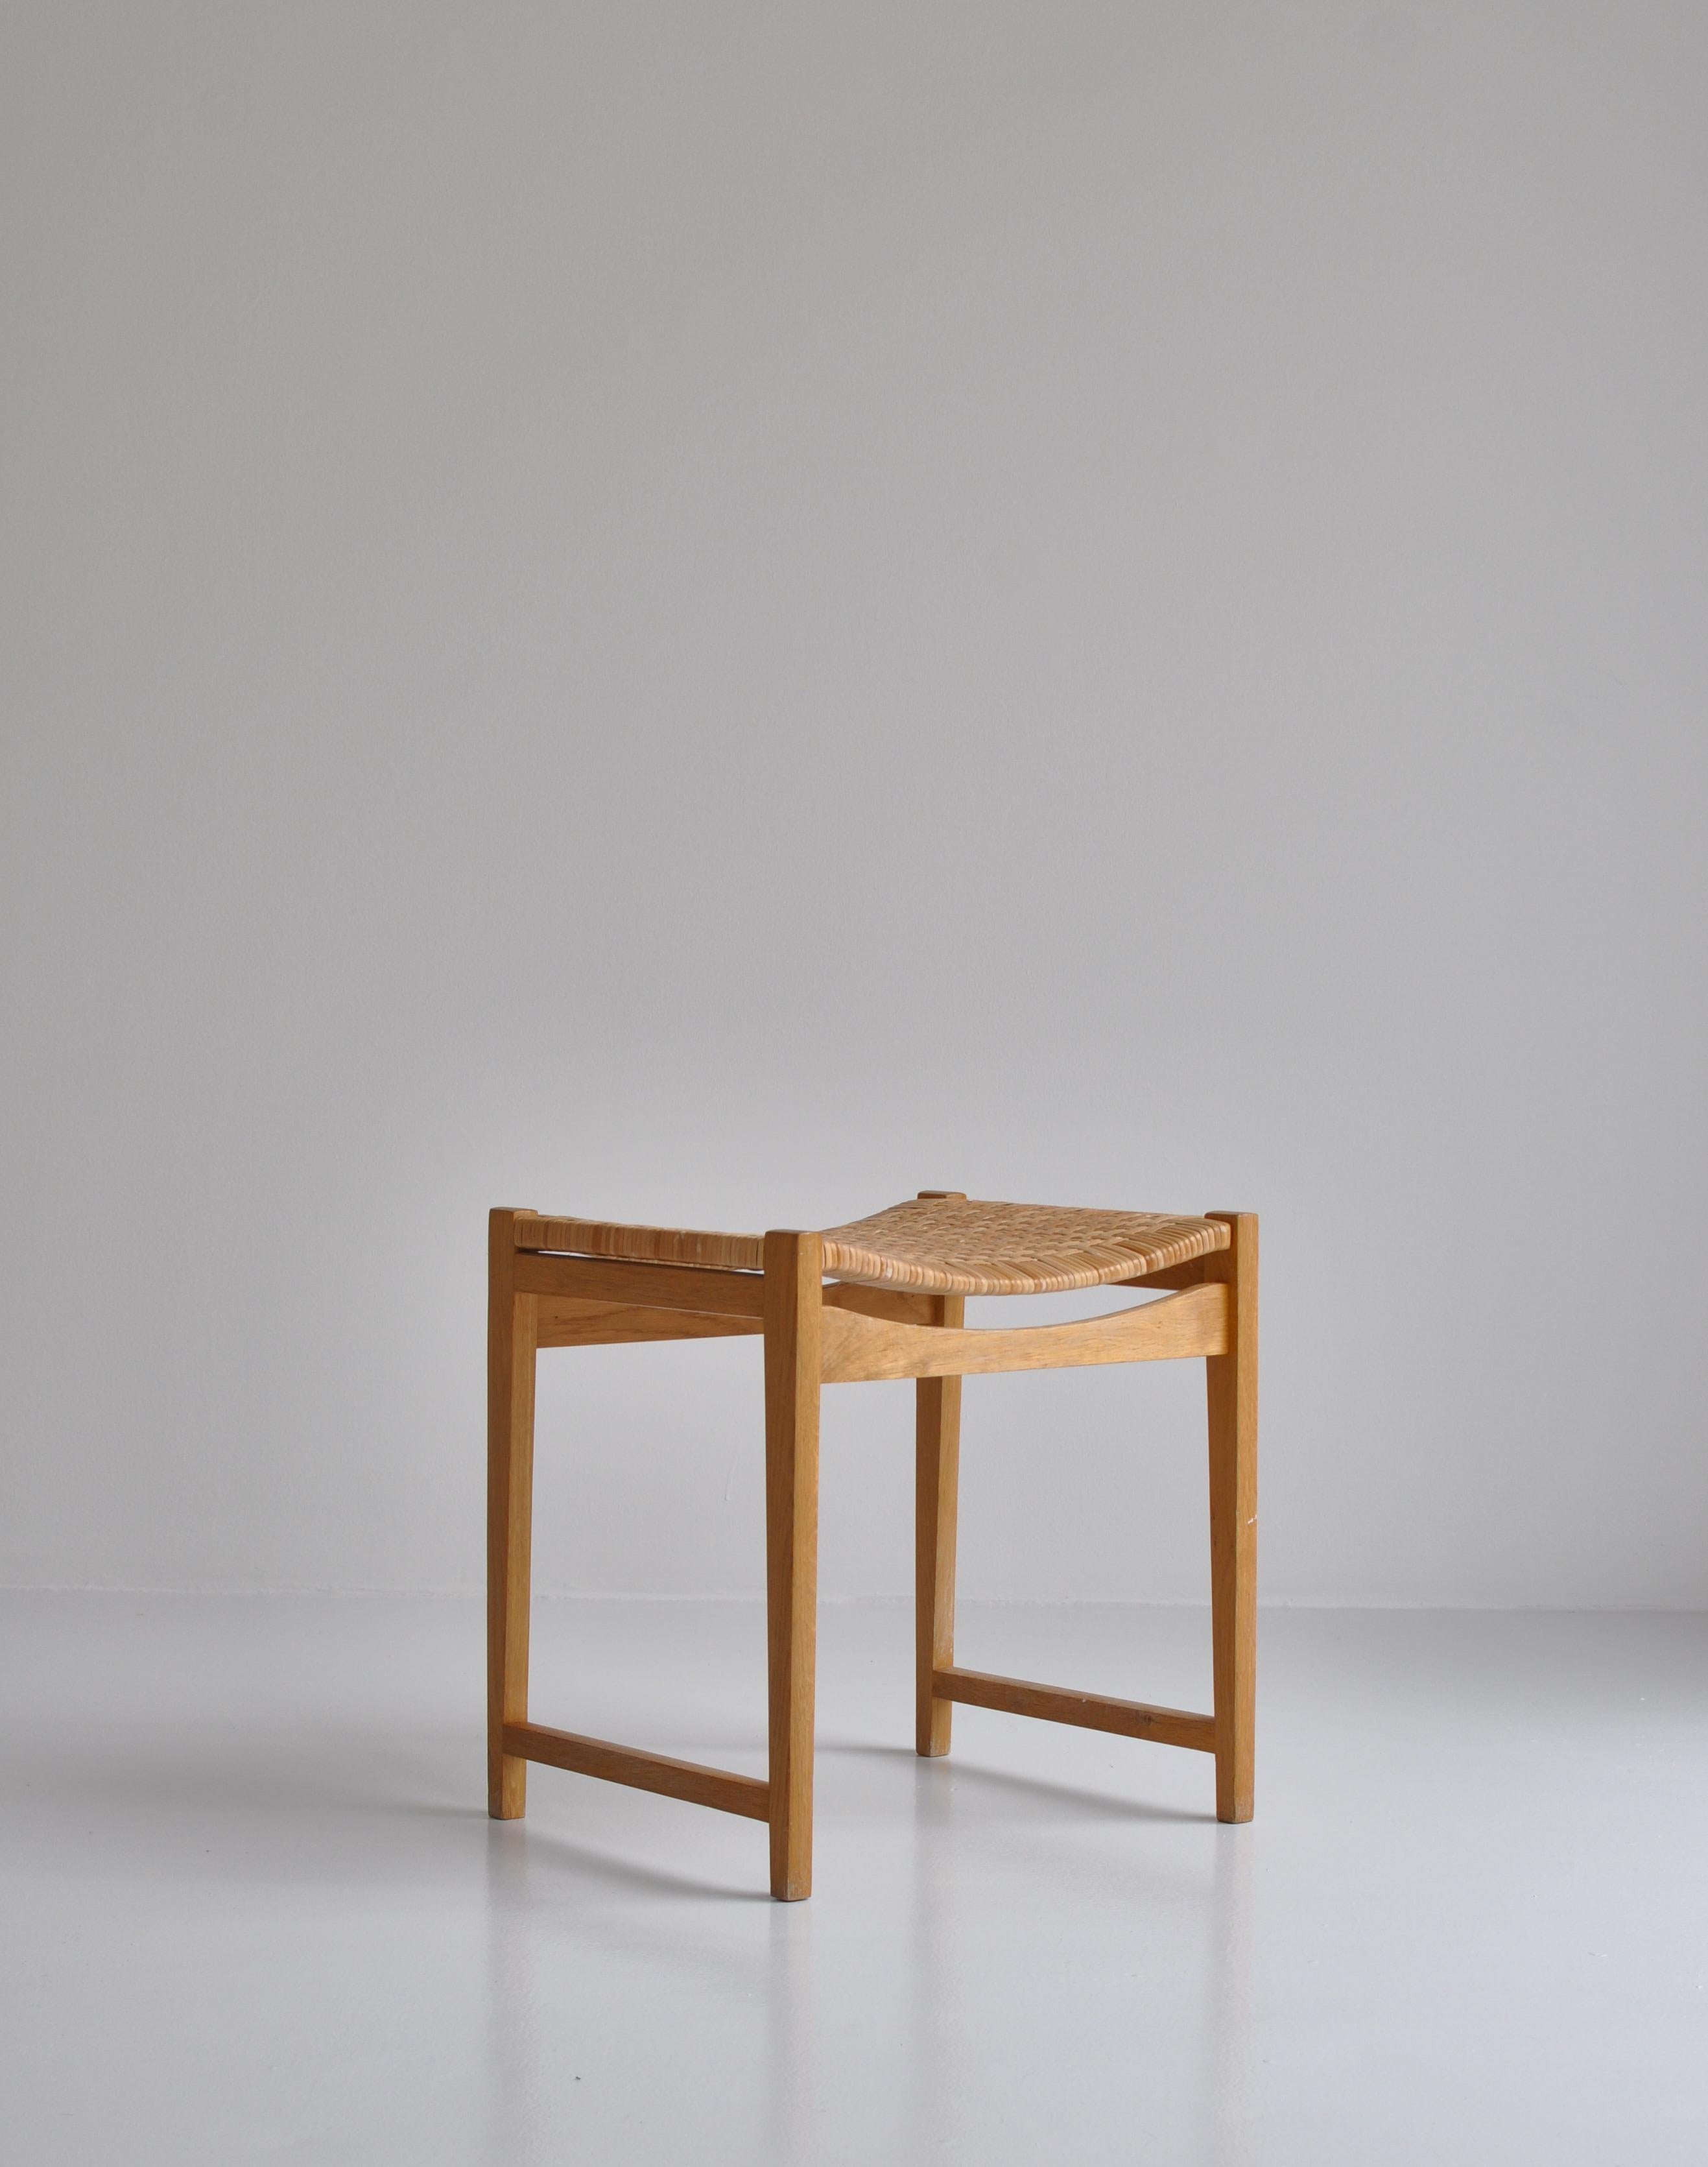 Beautiful and rare stool by design duo Peter Hvidt & Orla Mølgaard-Nielsen for Søborg Møbelfabrik. Made in the 1960s as part of the 